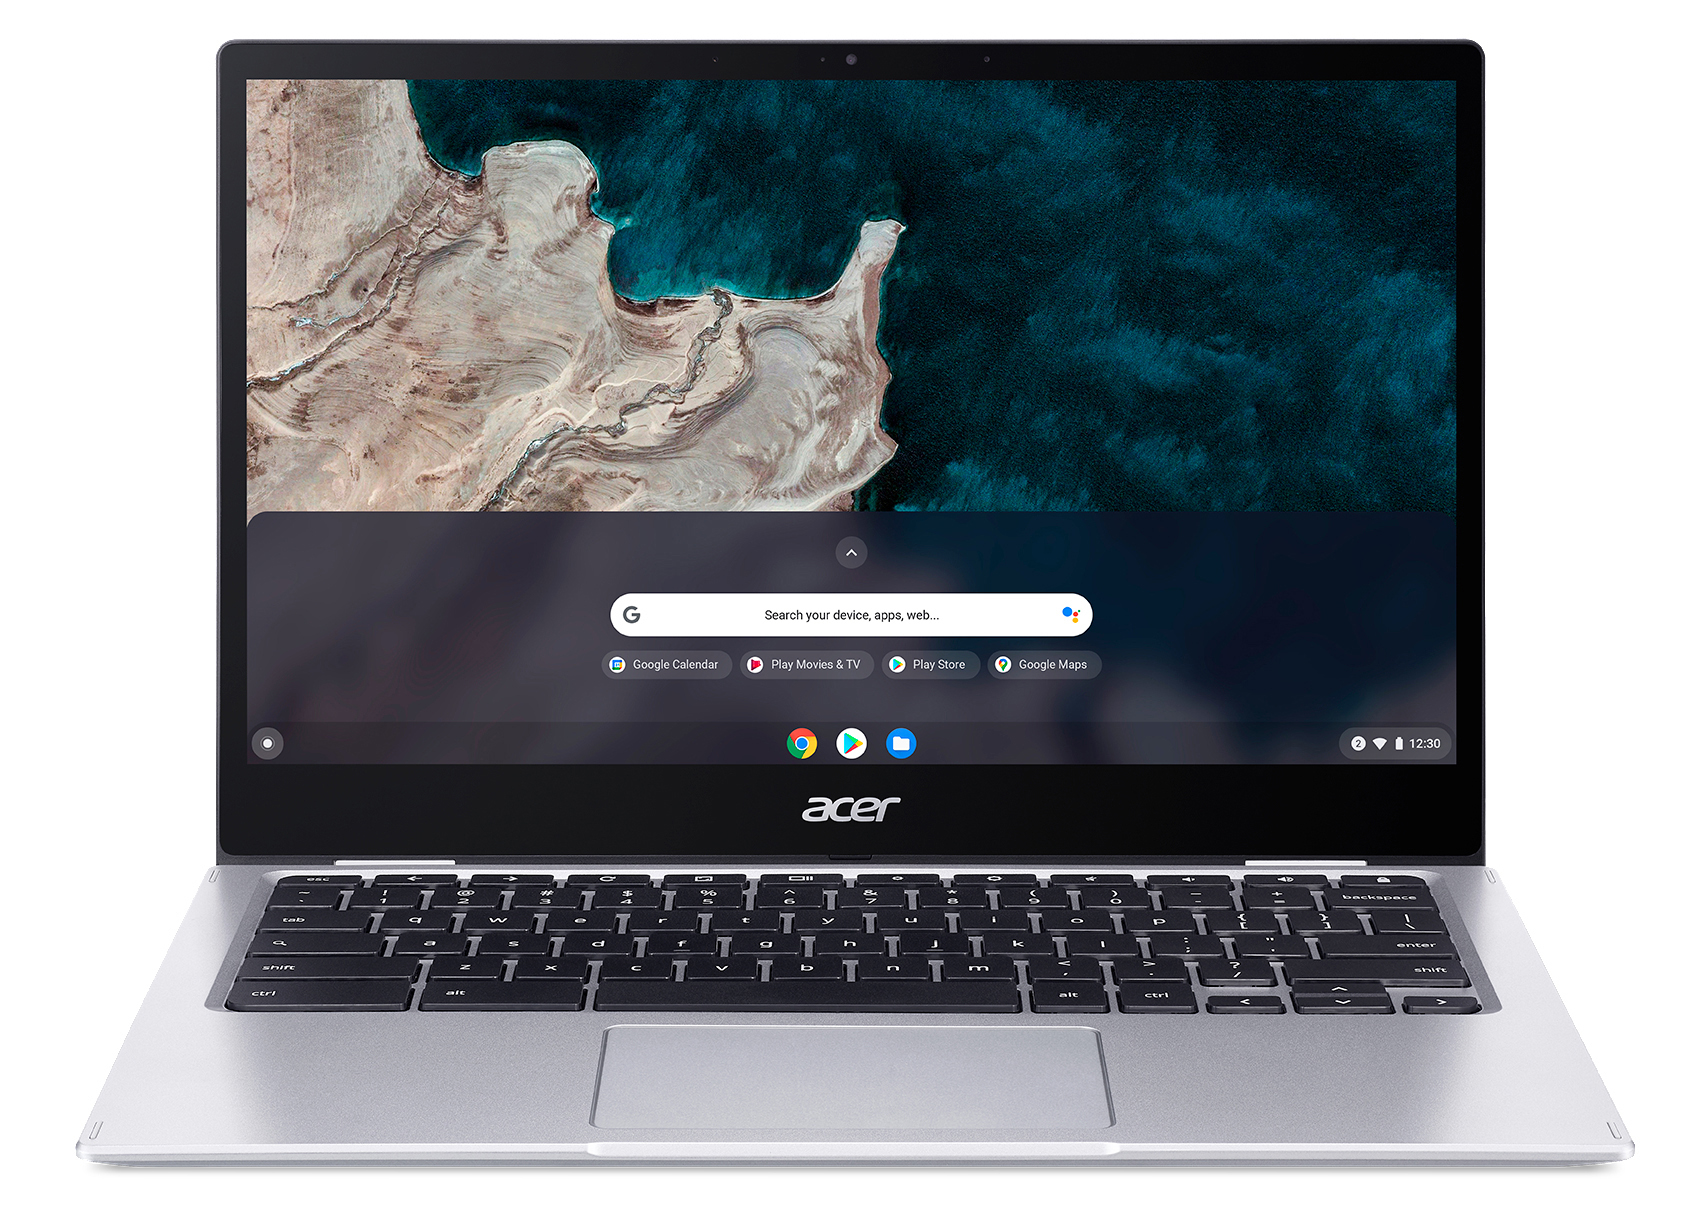 Spin ACER Touchscreen, 7c 513 Prozessor, Chromebook, Silber 4 Chromebook GB mit OS eMMC, (CP513-1H-S72Y) Chrome Onboard Zoll Qualcomm Display GB Graphics, Adreno™ 64 13,3 RAM, Google mit Tastaturbeleuchtung,